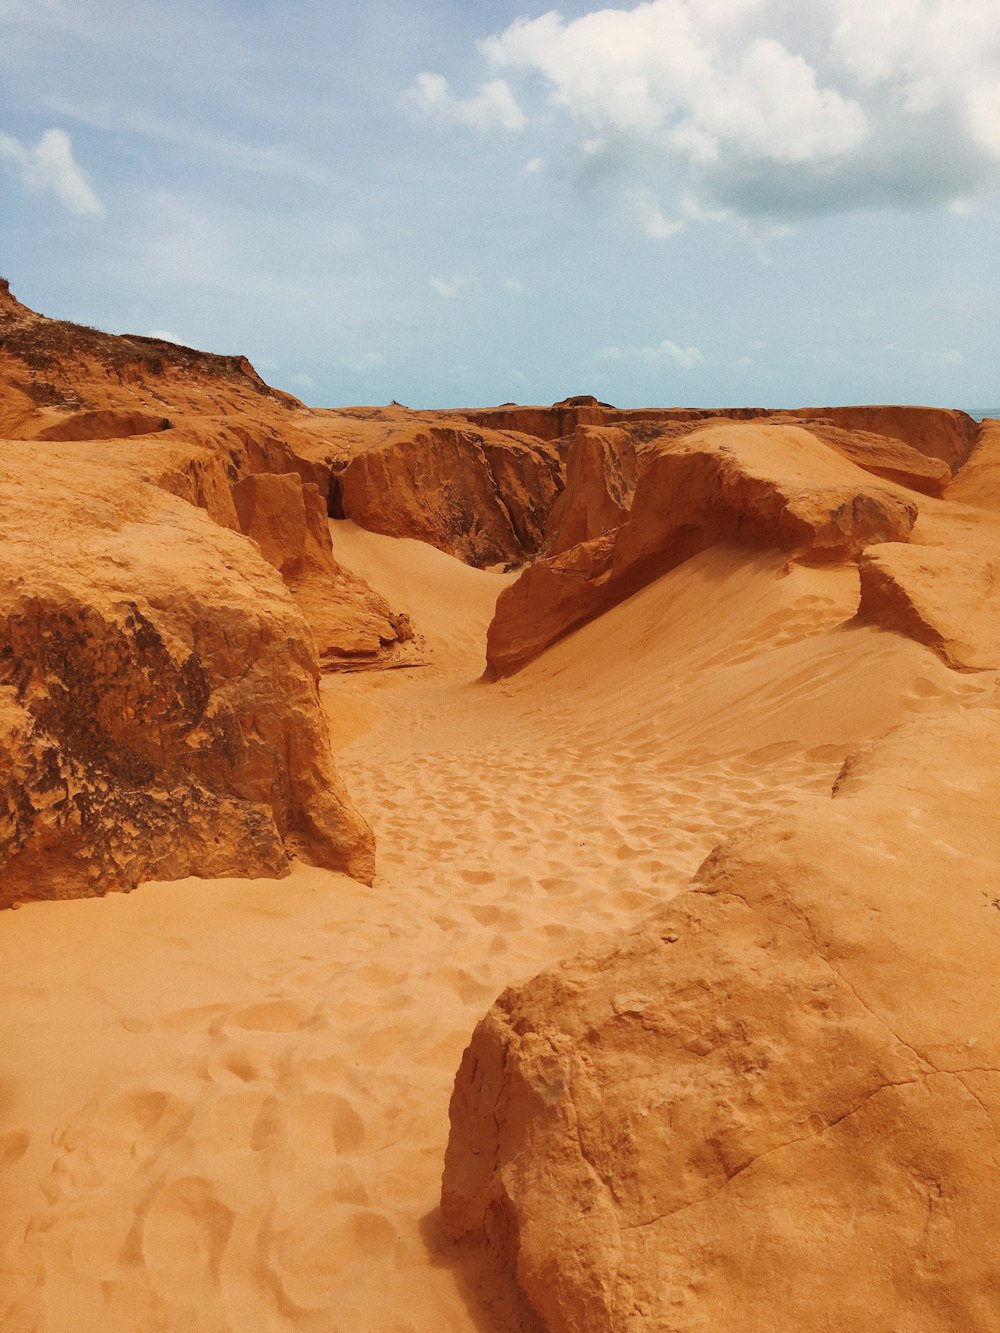 a sandy area with rocks and sand dunes